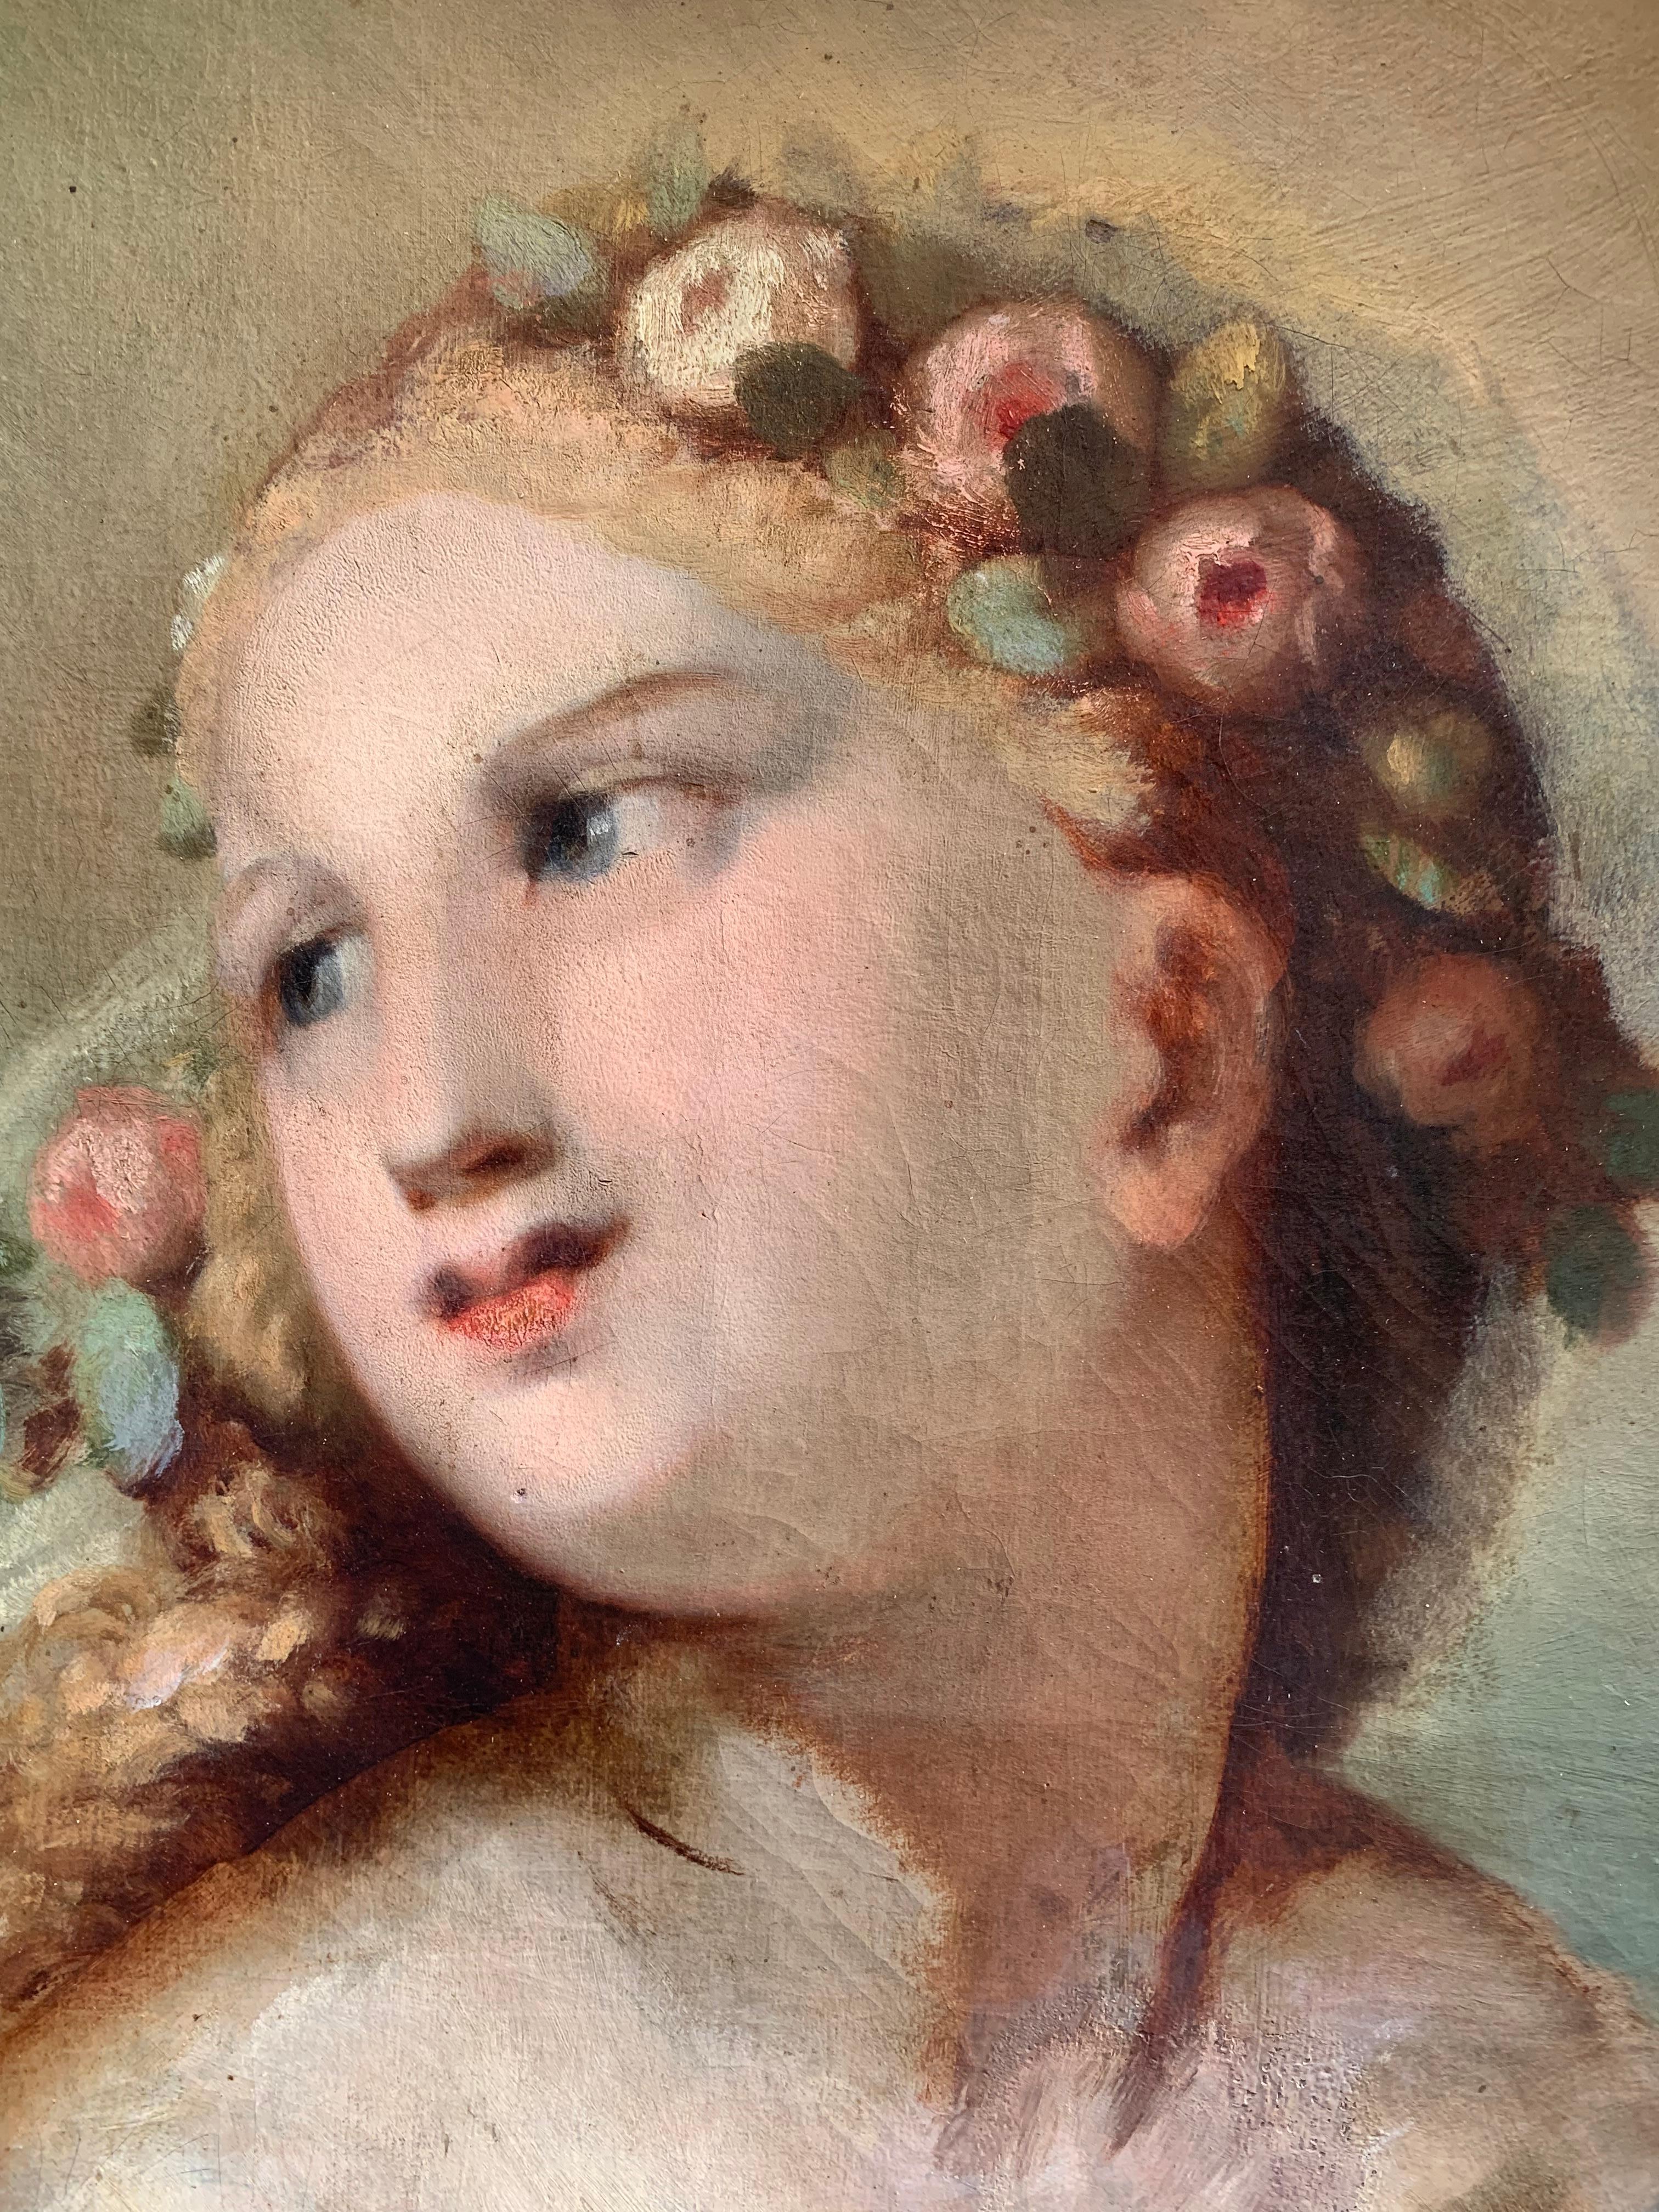 Allegory of Spring. Belle époque. Late 19th century.
Technique: oil on canvas. Relined.

Size with frame: cm 77 x 65
Size without frame: cm 66 x 55cm

It represents an ideal image of a young girl with a wreath of flowers in her hair. It is an